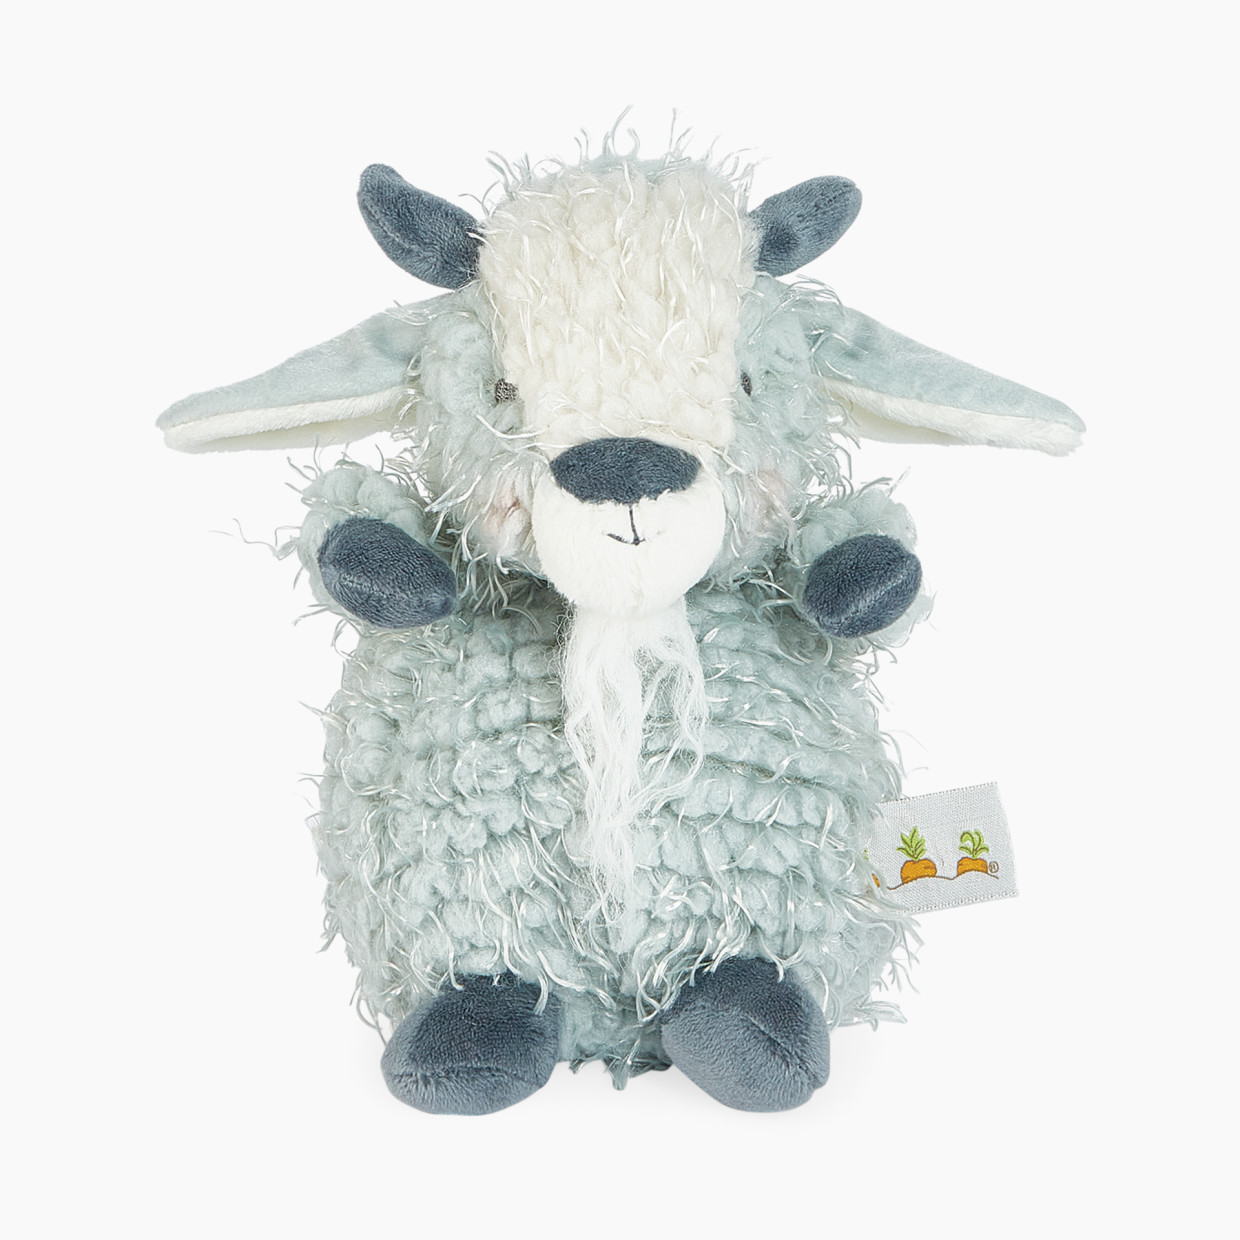 Bunnies By The Bay, Inc. Wee Stuffed Animal - Billy Goat.